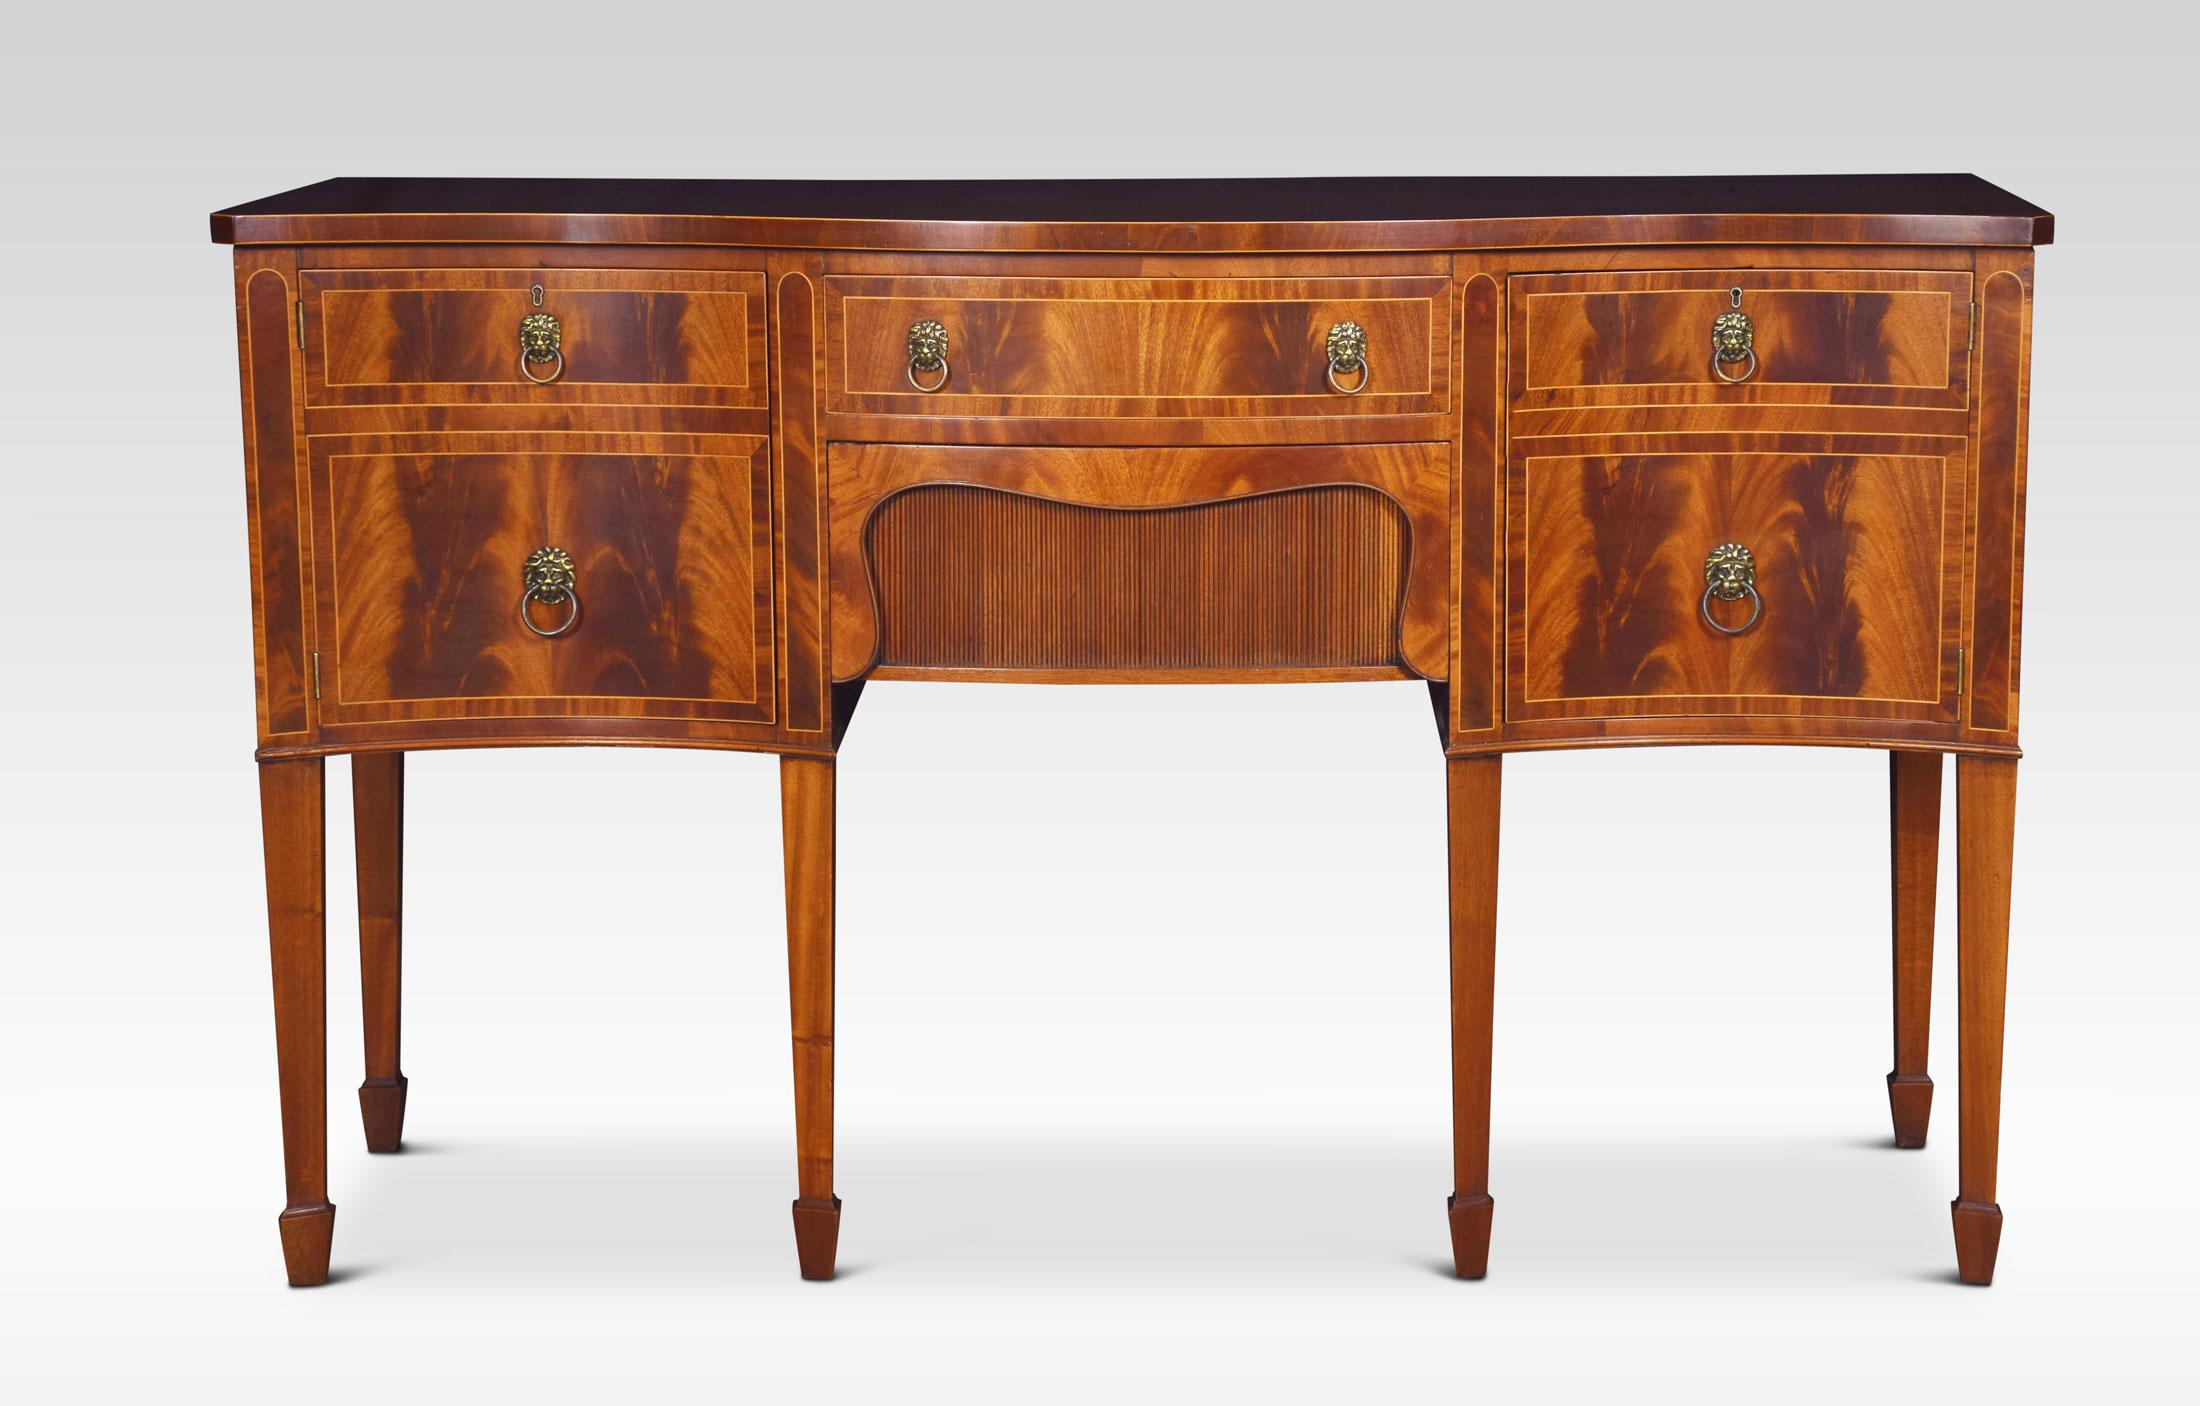 Mahogany and string inlaid sideboard, the large rectangular well-figured serpentine fronted top. Above two central frieze drawers flanked by faux drawer cupboards. All raised up on tapering square legs and spade feet.
Dimensions
Height 36